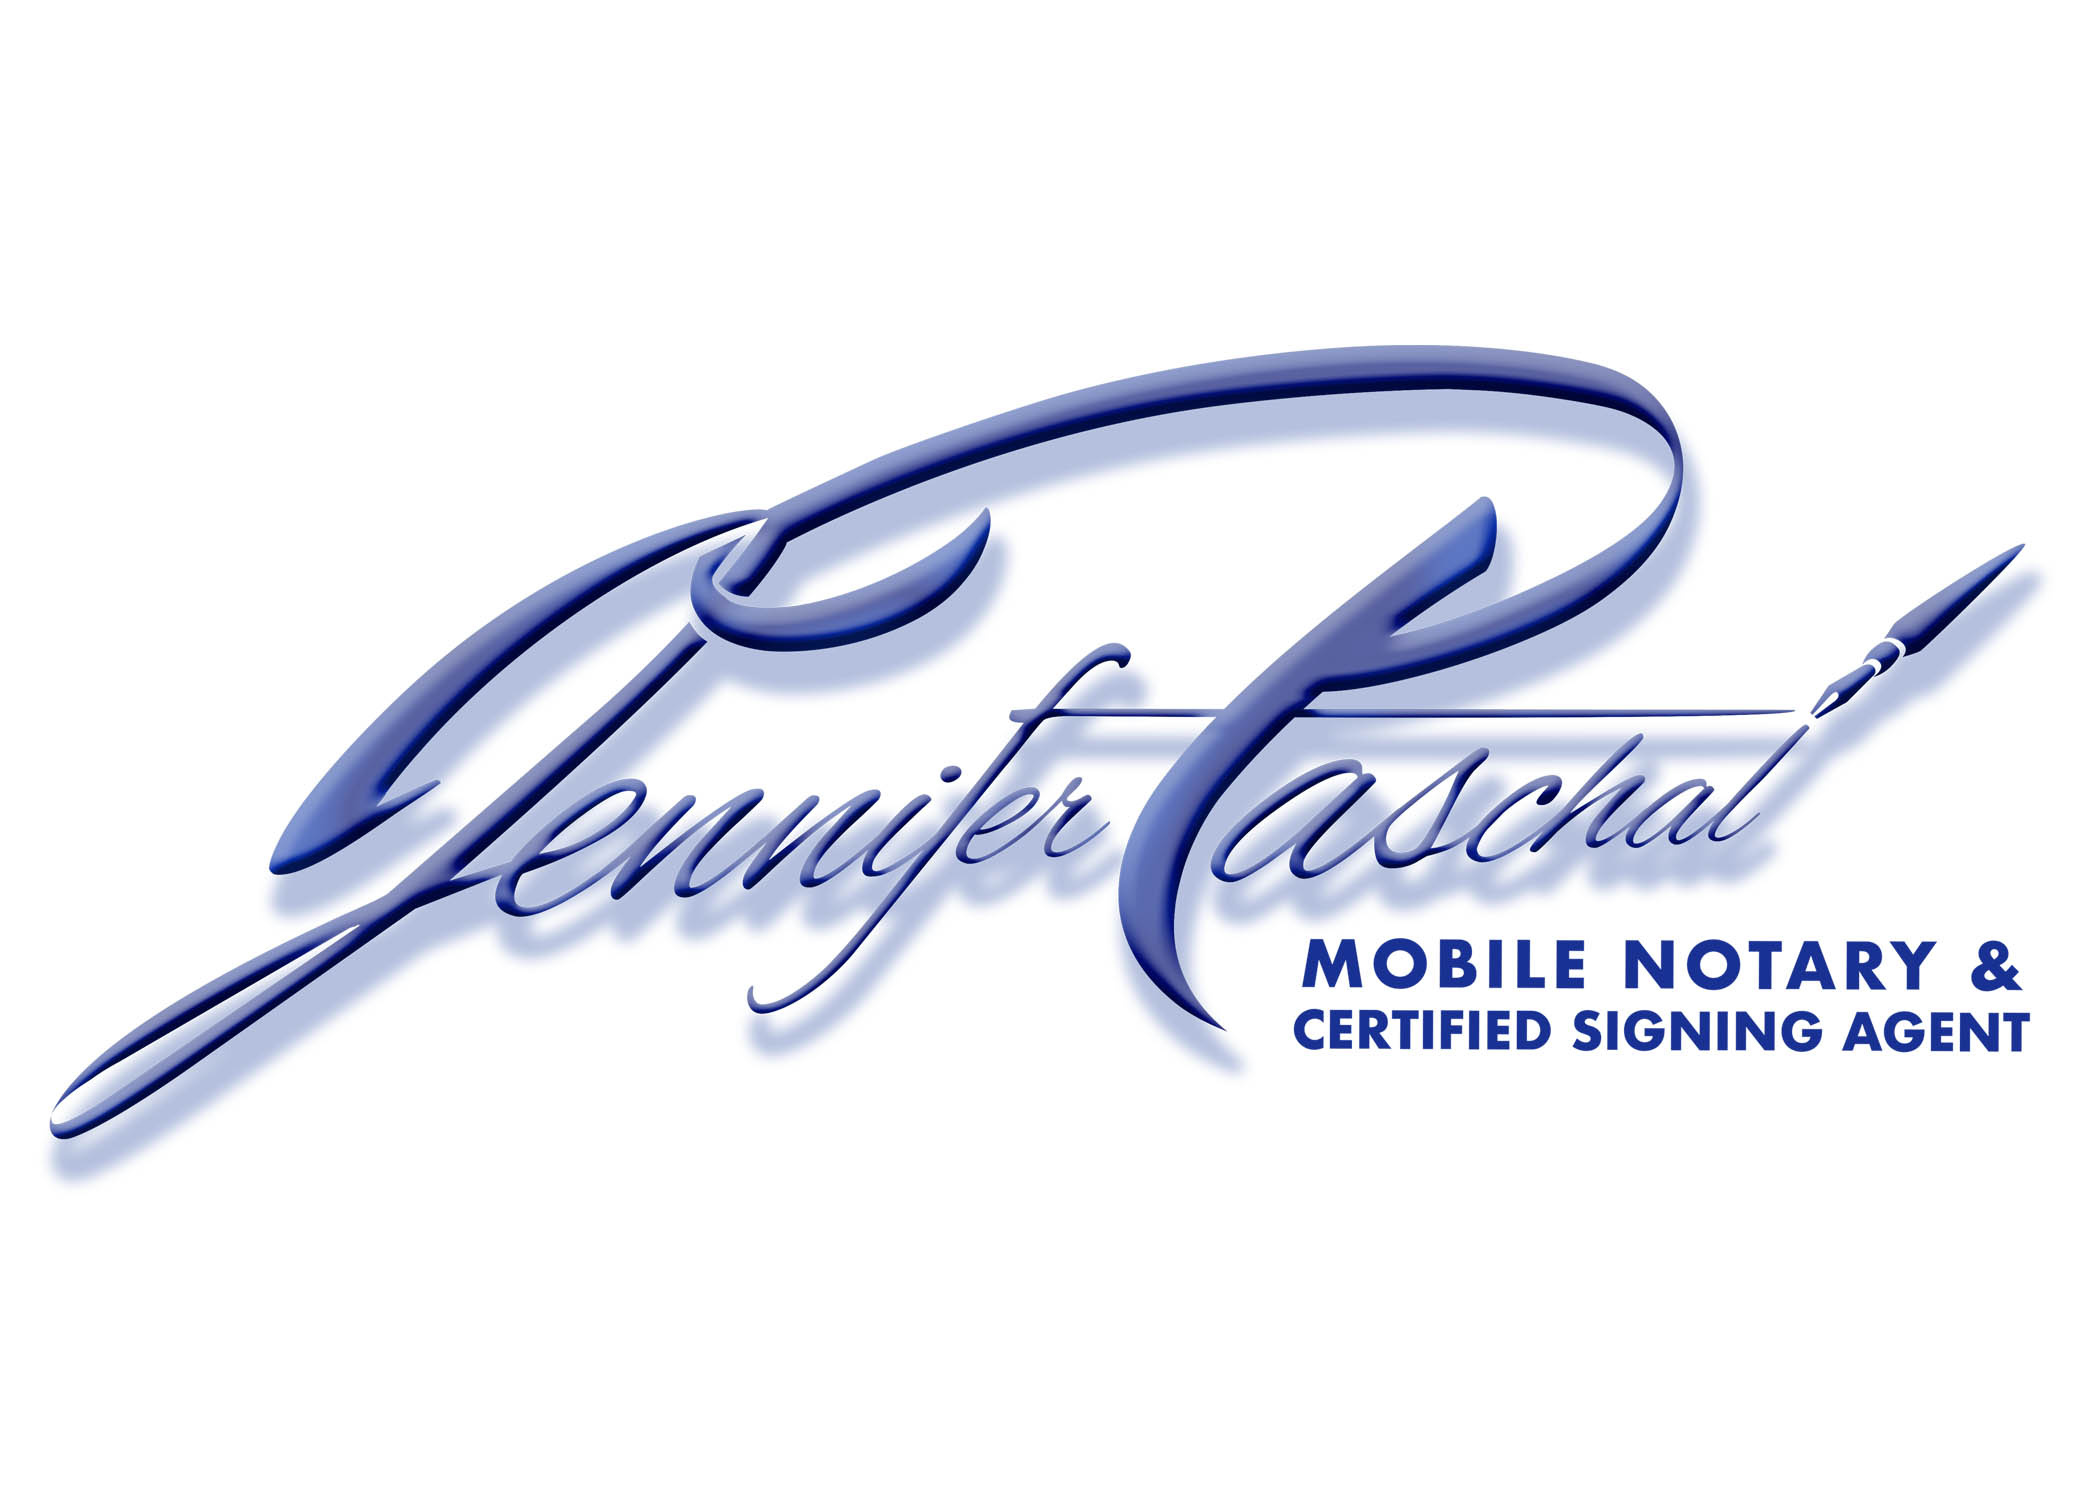 JENNIFER PACHAL
MOBILE NOTARY